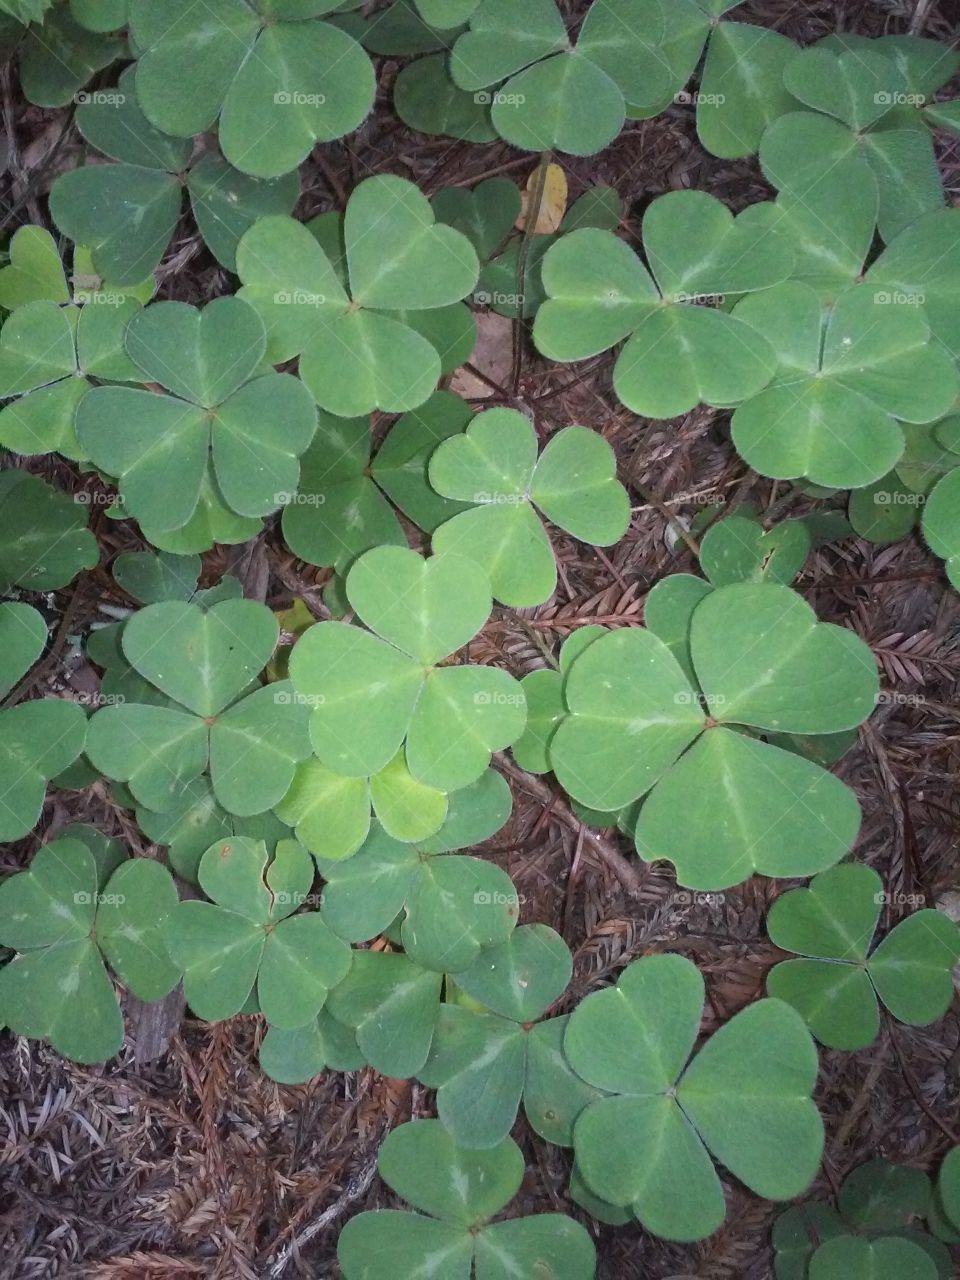 lucky clover, where are you?. looking for the four leaf clover